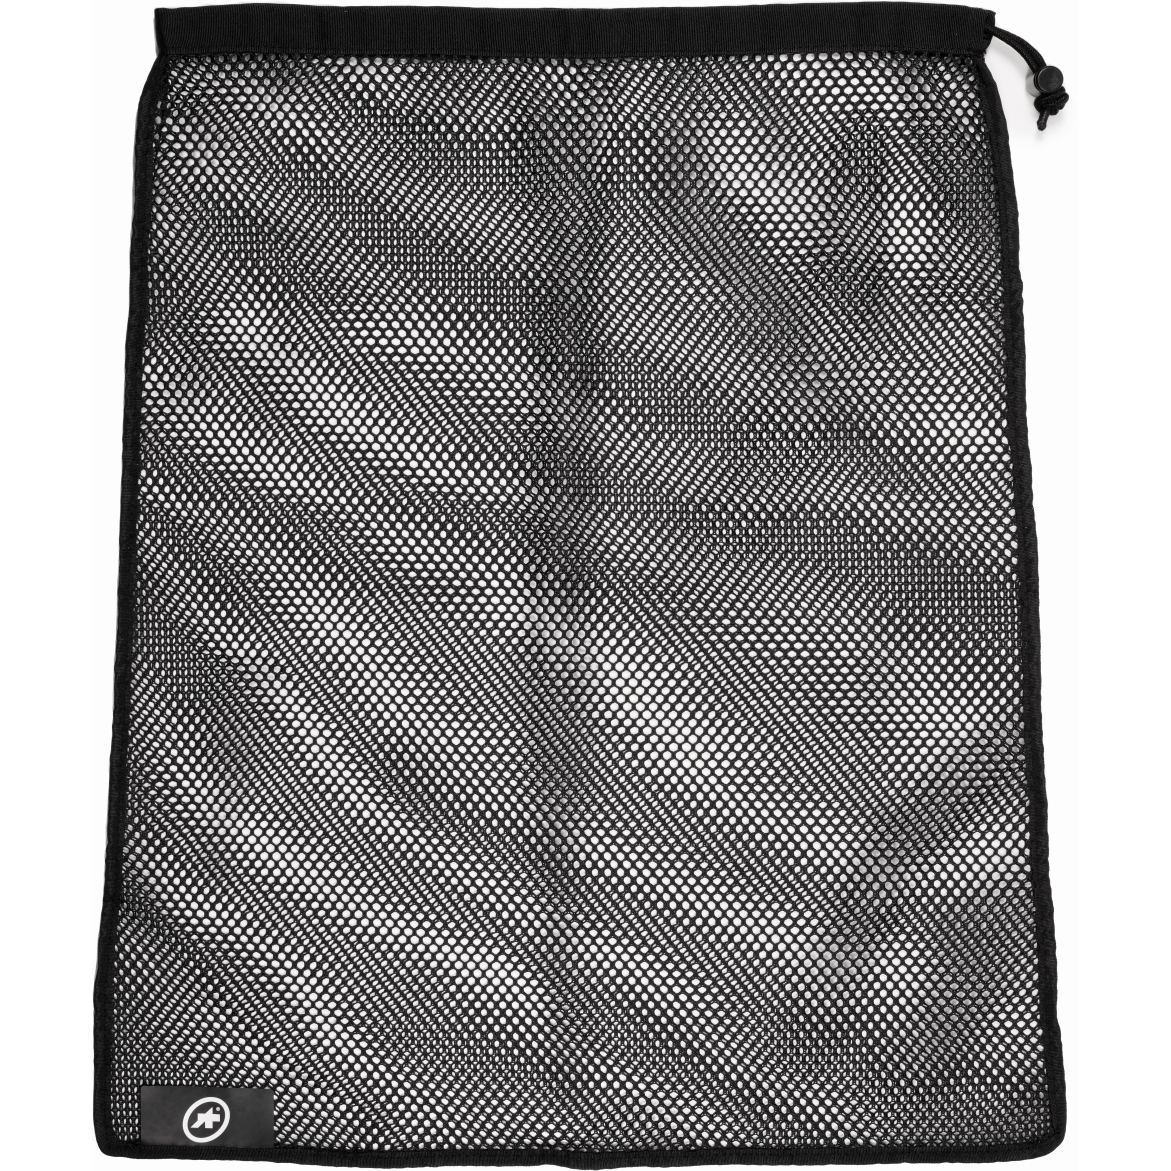 Picture of Assos Laundry Bag EVO - blackSeries